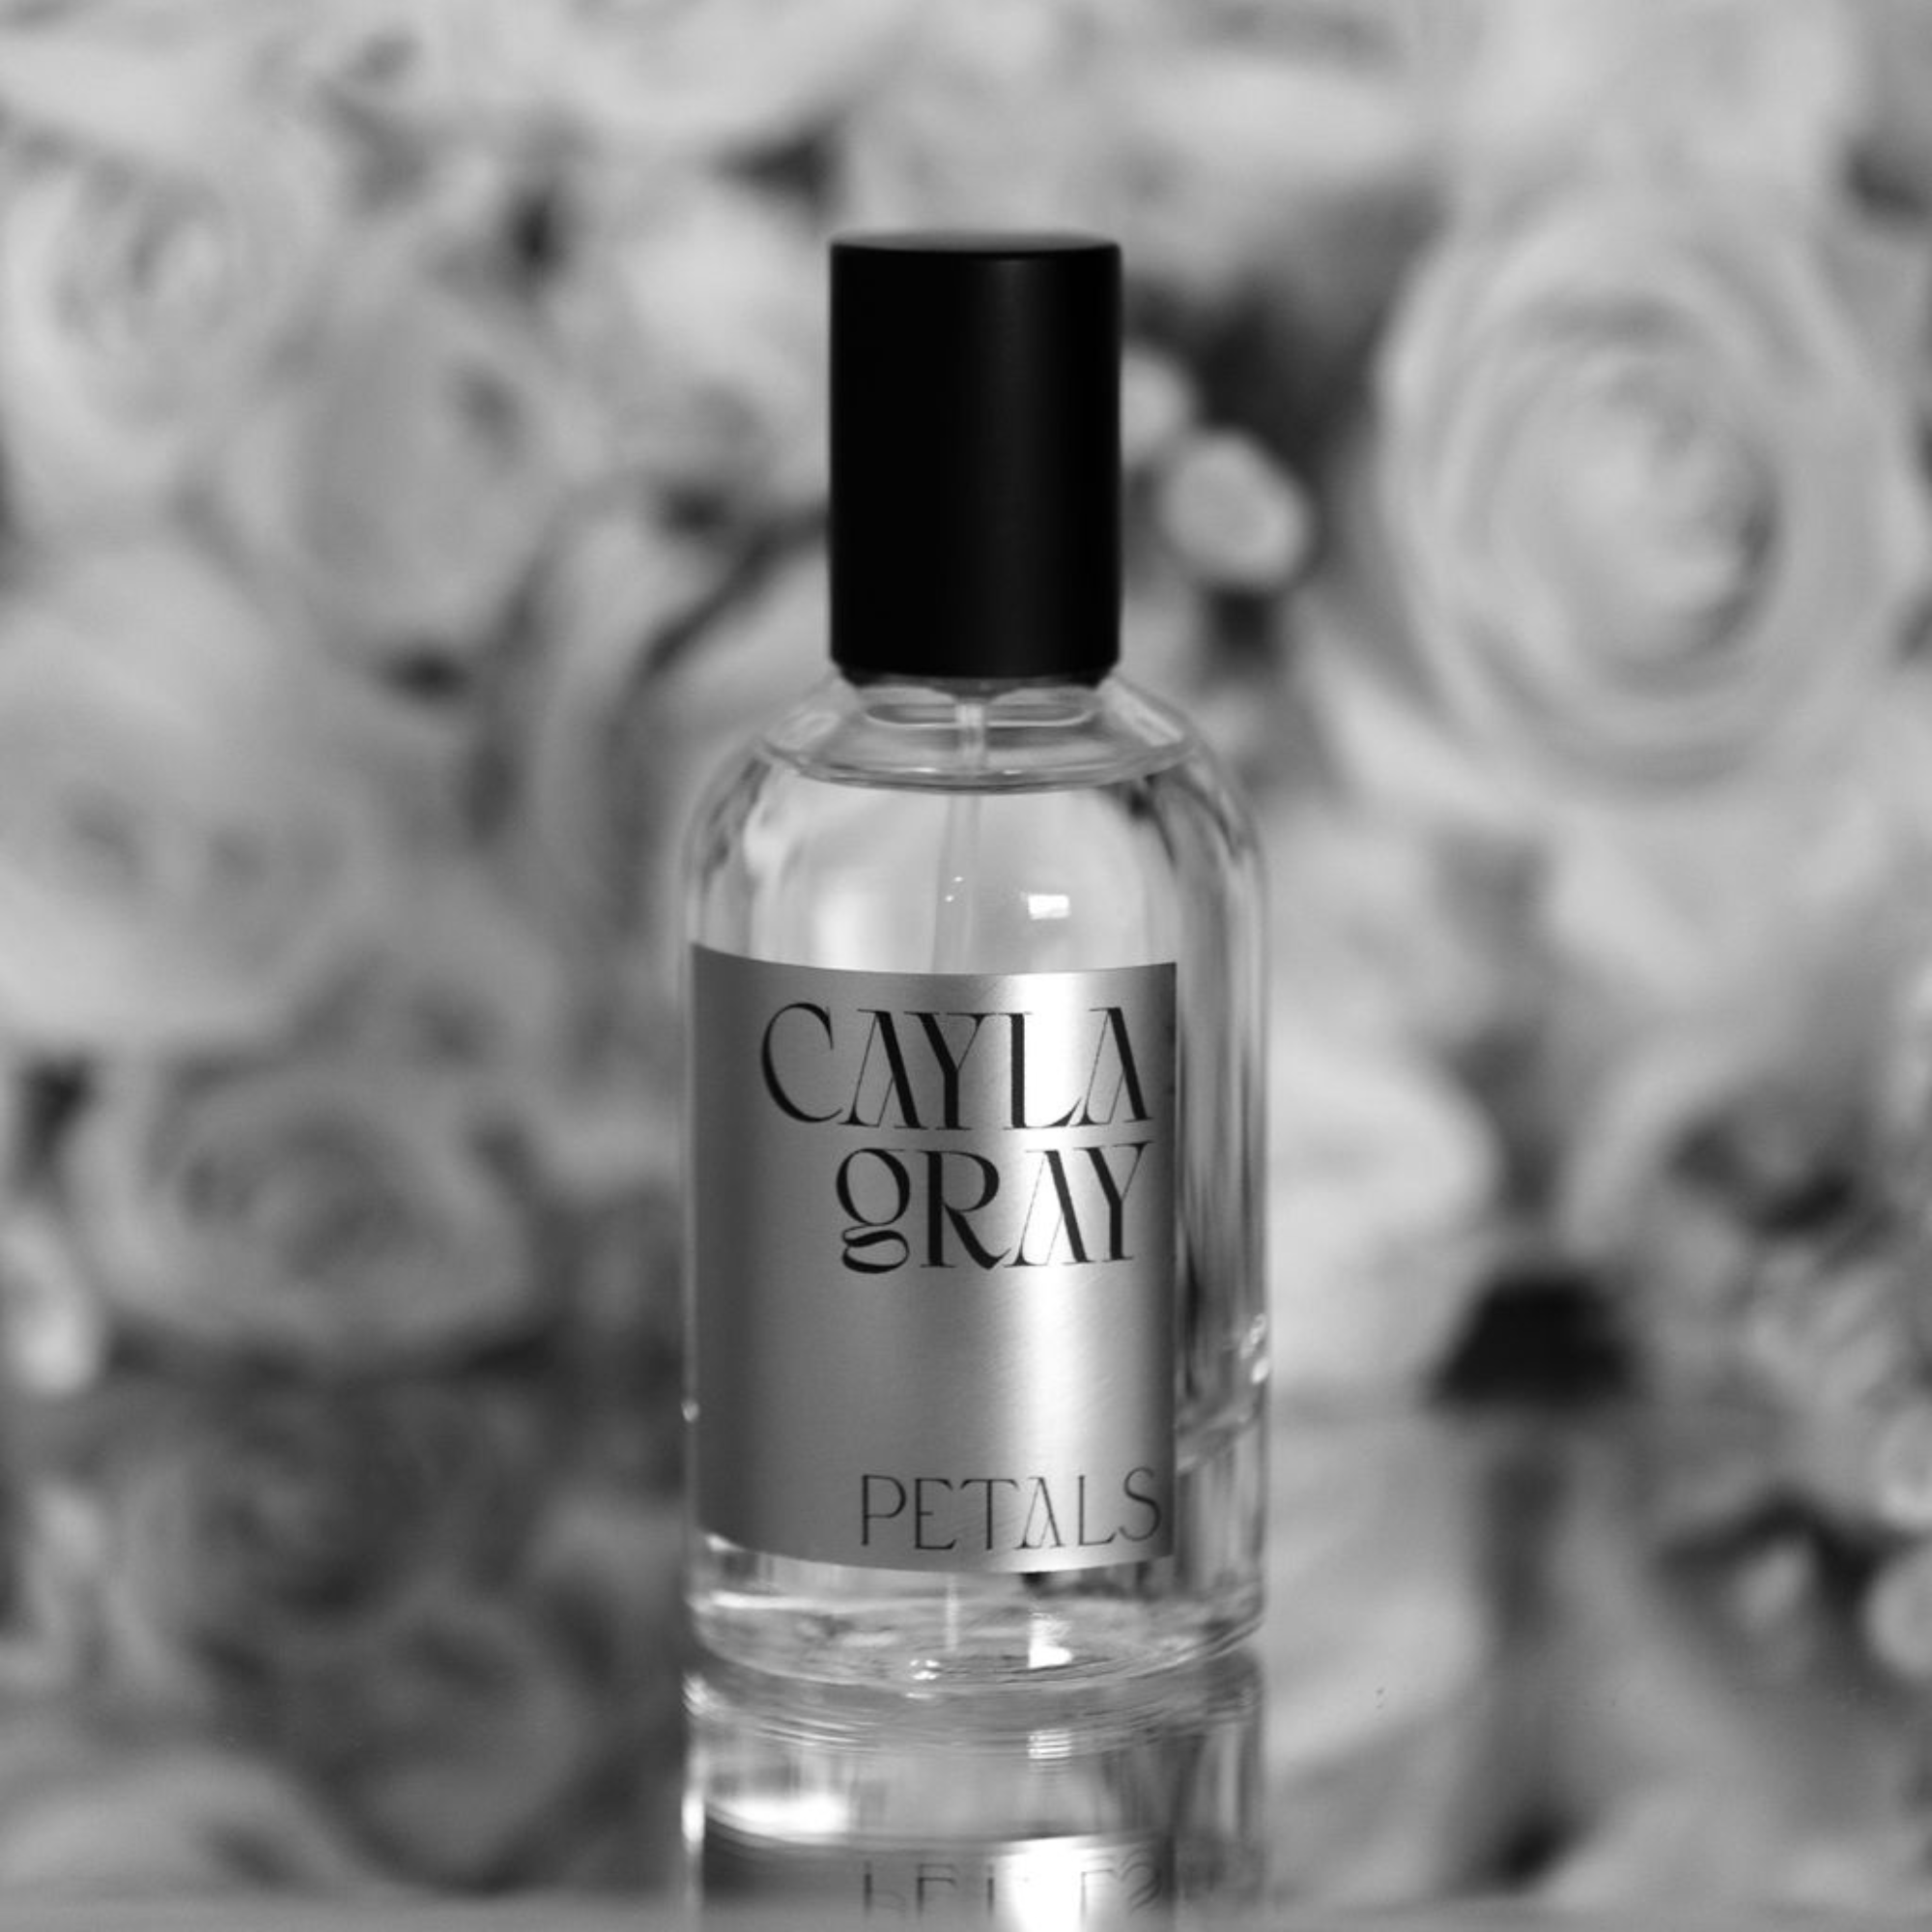 Cashmere Rose by Zara » Reviews & Perfume Facts